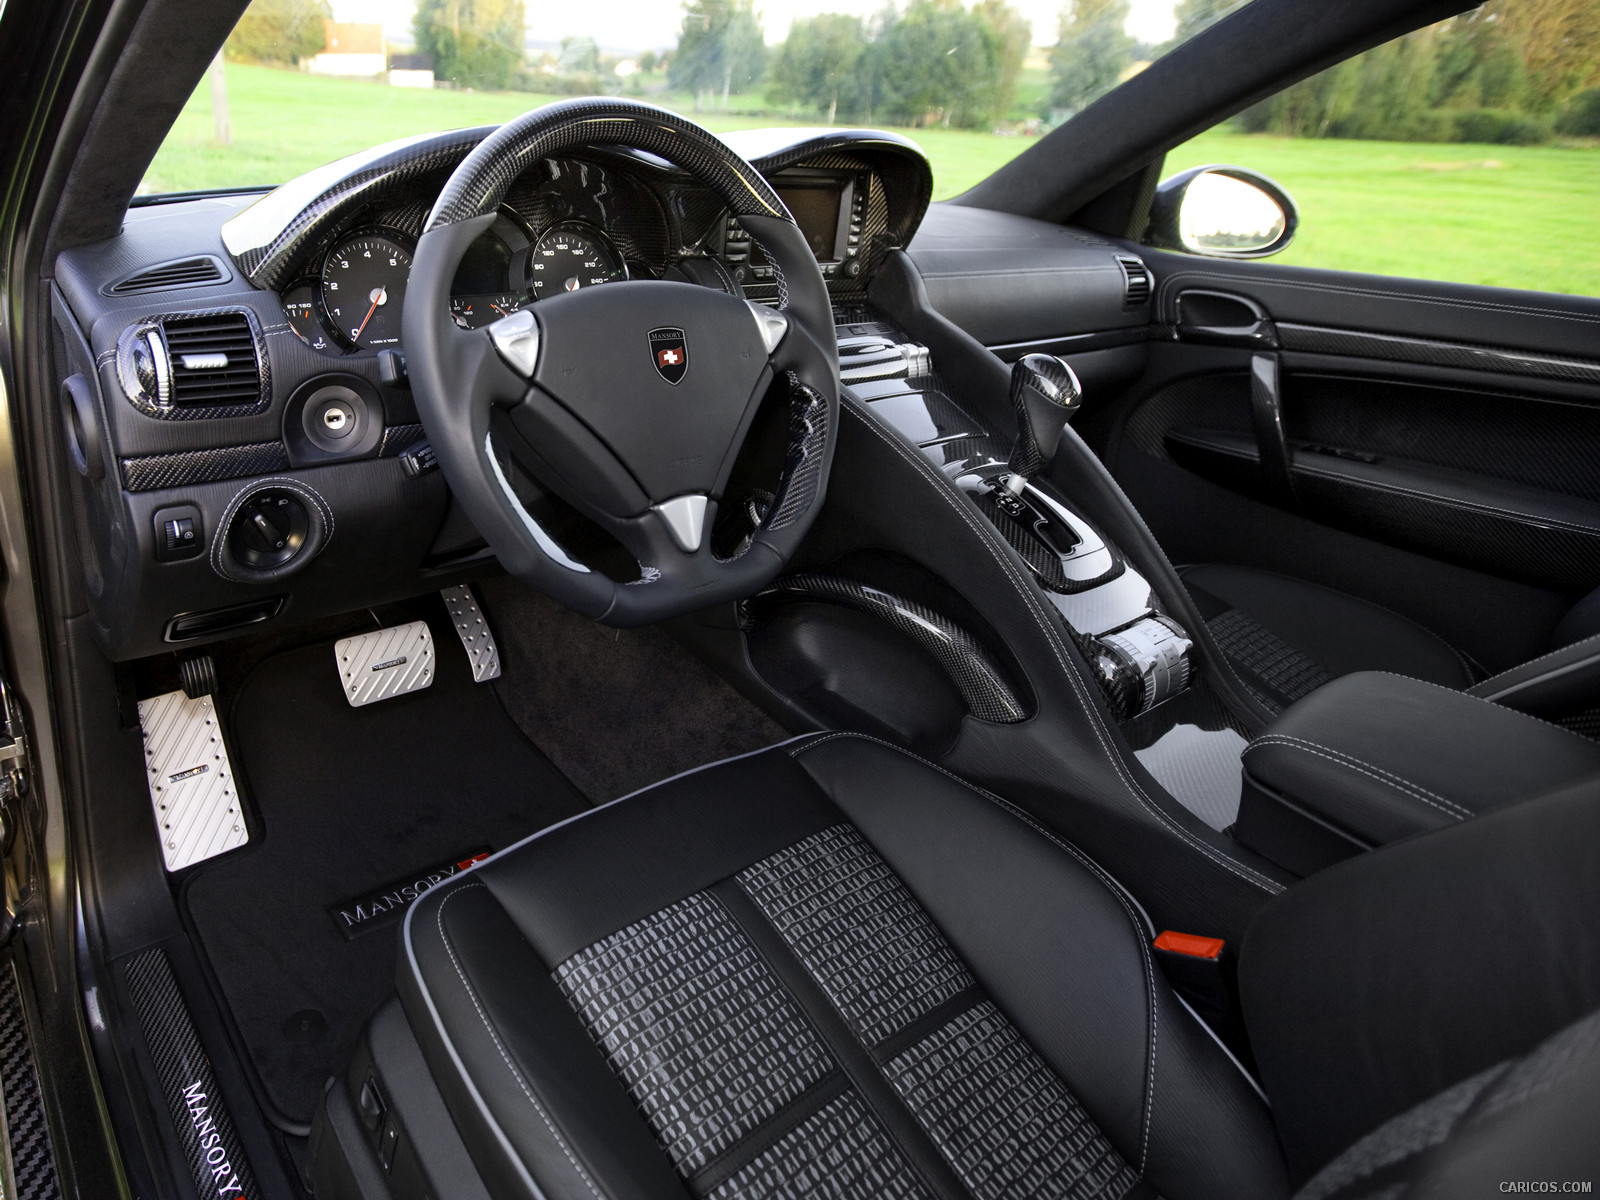 2009 Mansory Chopster based on Porsche Cayenne Turbo S  - Interior, #24 of 38